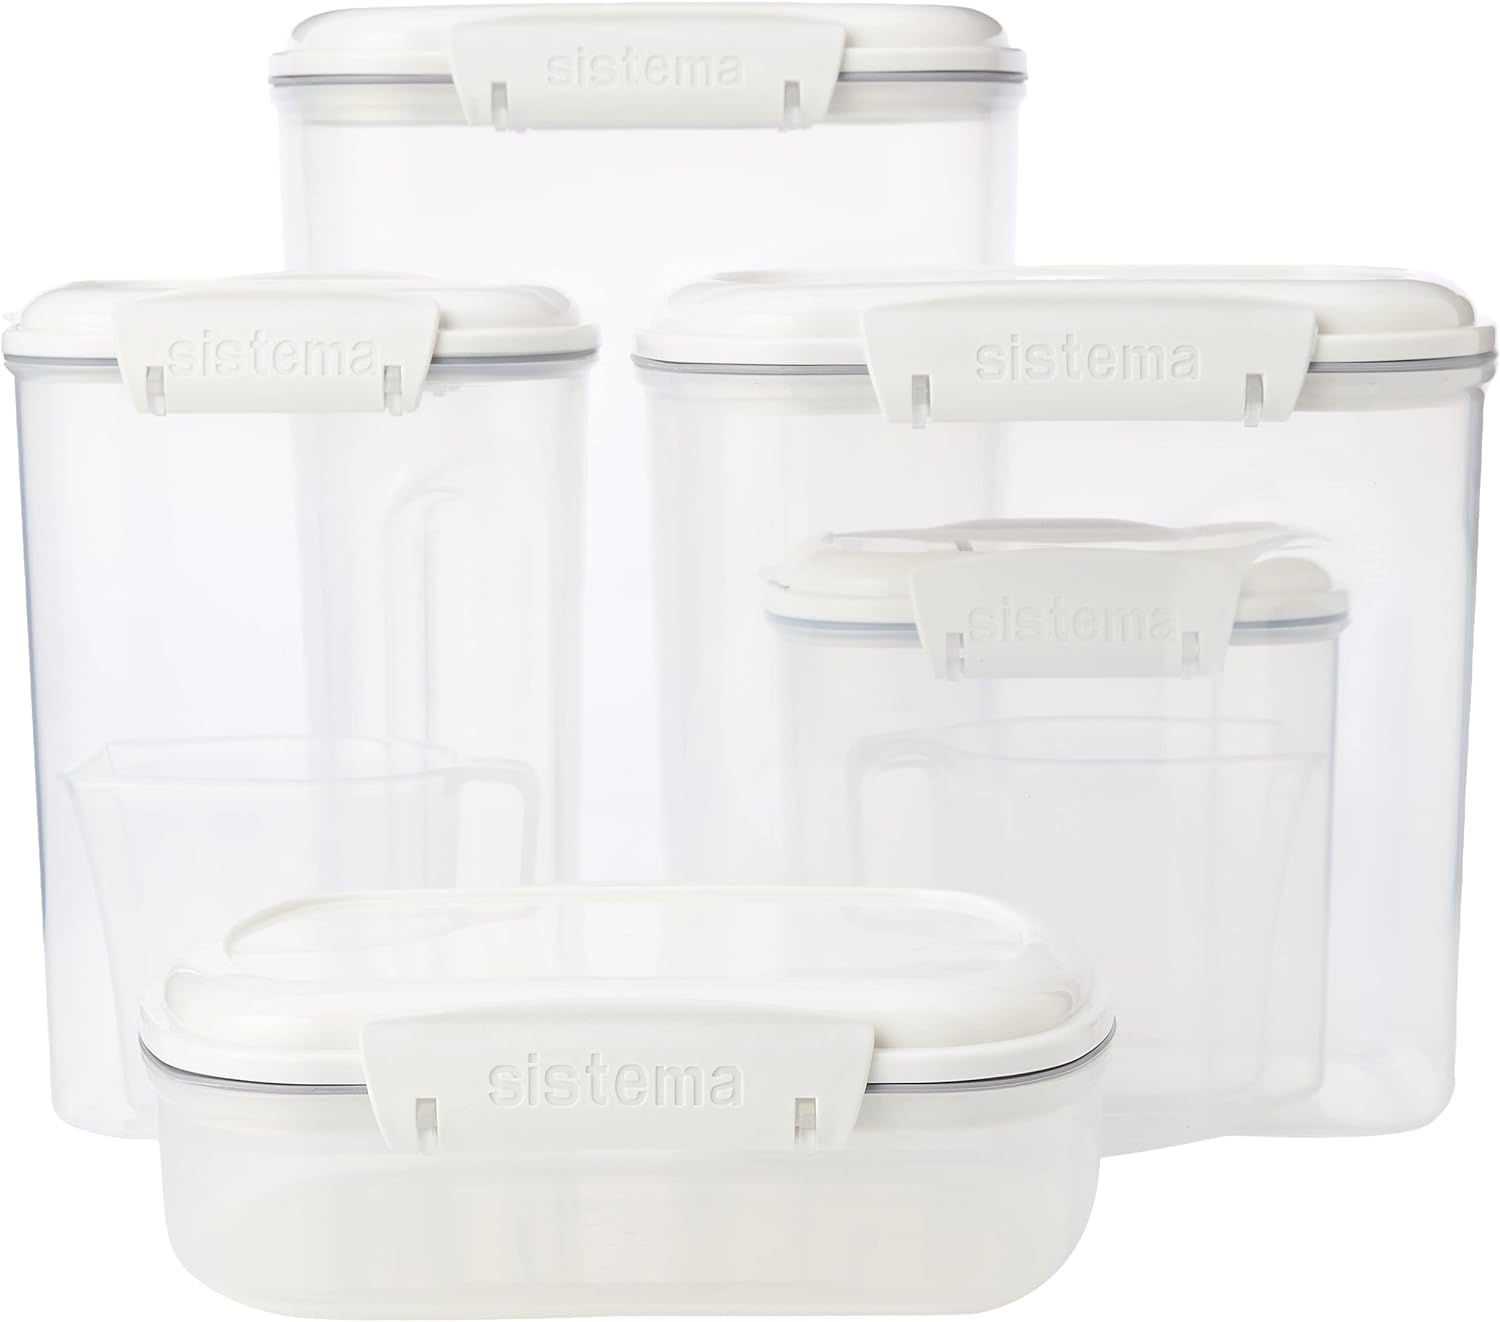 Sistema 5-Piece Food Storage Containers for Pantry with Lids and 2 Measuring Cups for Flour and Sugar, Dishwasher Safe, White